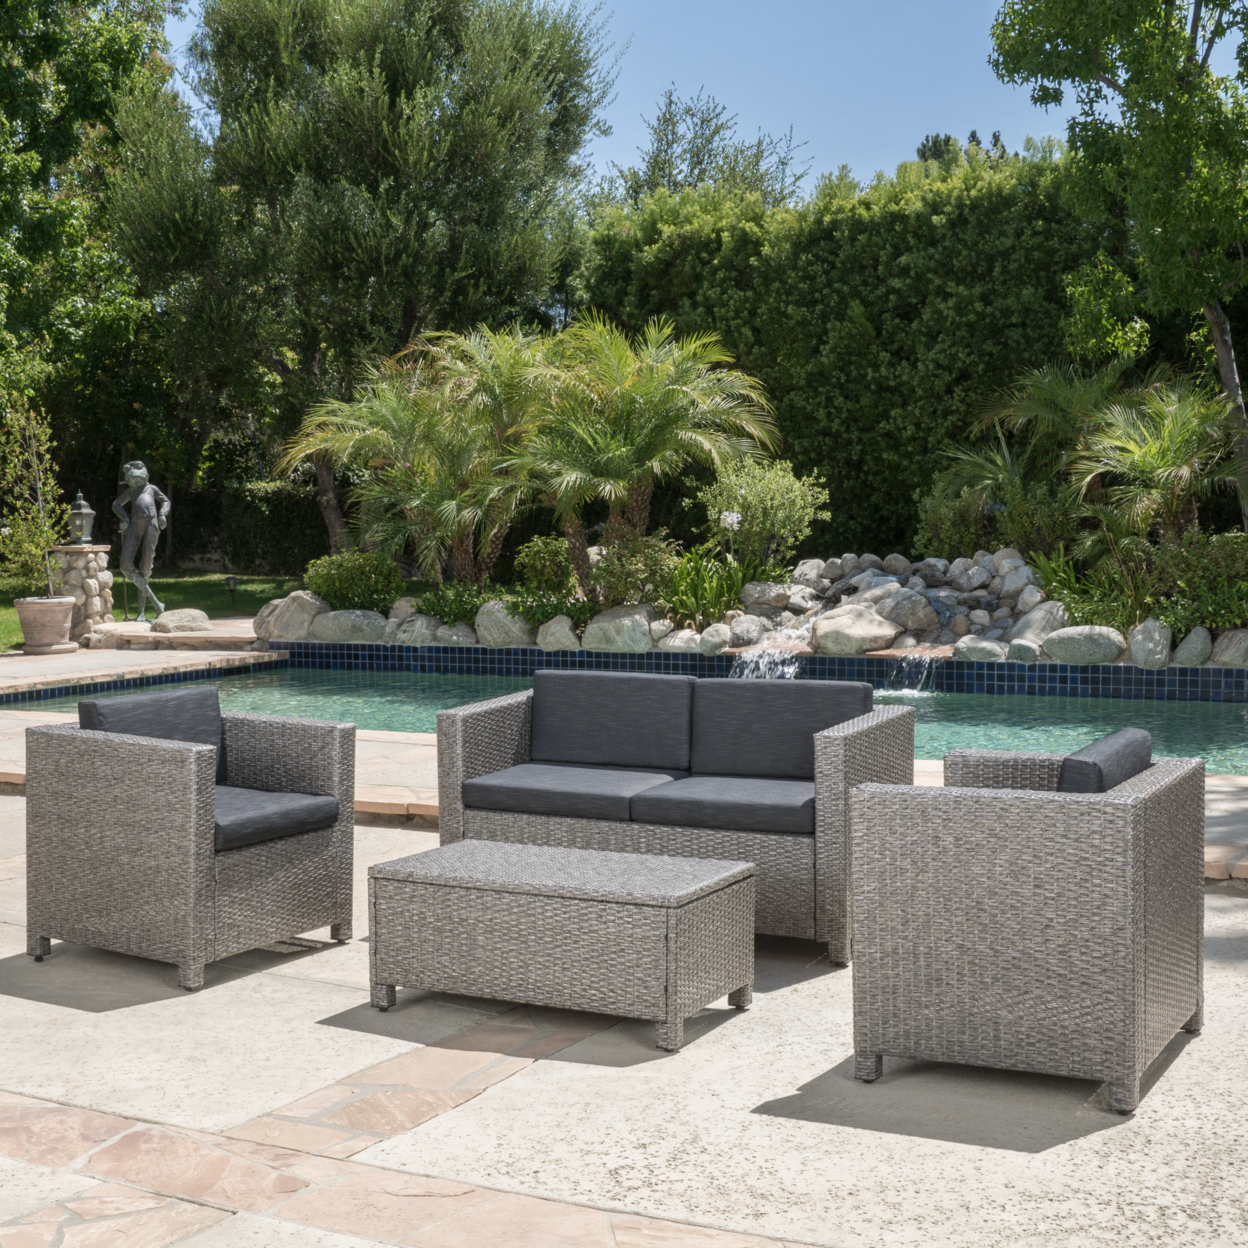 Pueblo 4 Piece Wicker Chat Set With Water Resistant Cushions & Cover - Mixed Black/Dark Gray